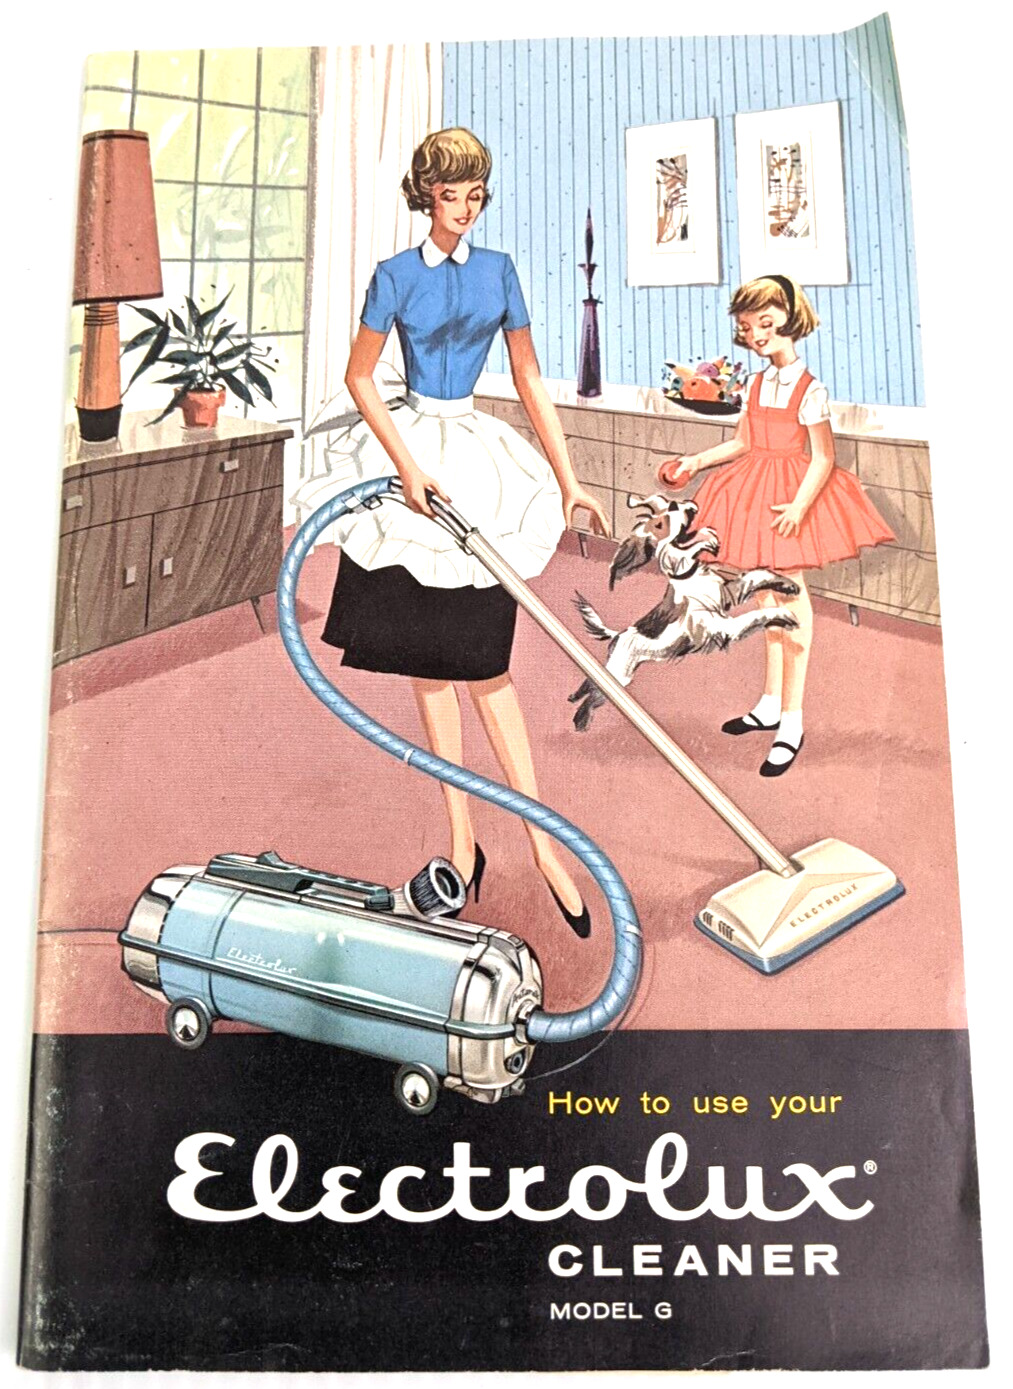 Vintage Electrolux Cleaner Model G \'How to Use\' Booklet Manual 1960s 27 pages